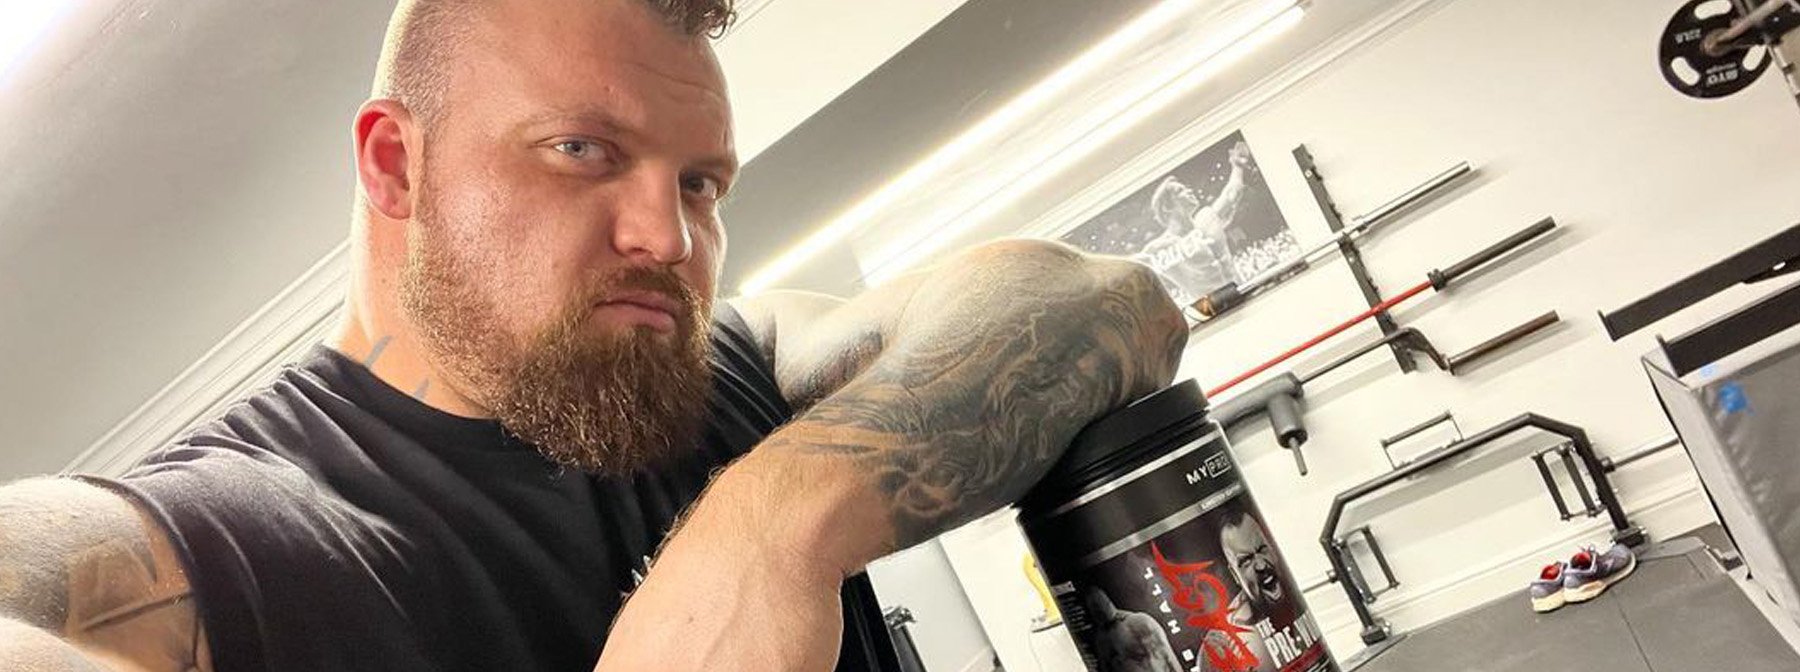 Eddie Hall Shaves Beard For The First Time In Years